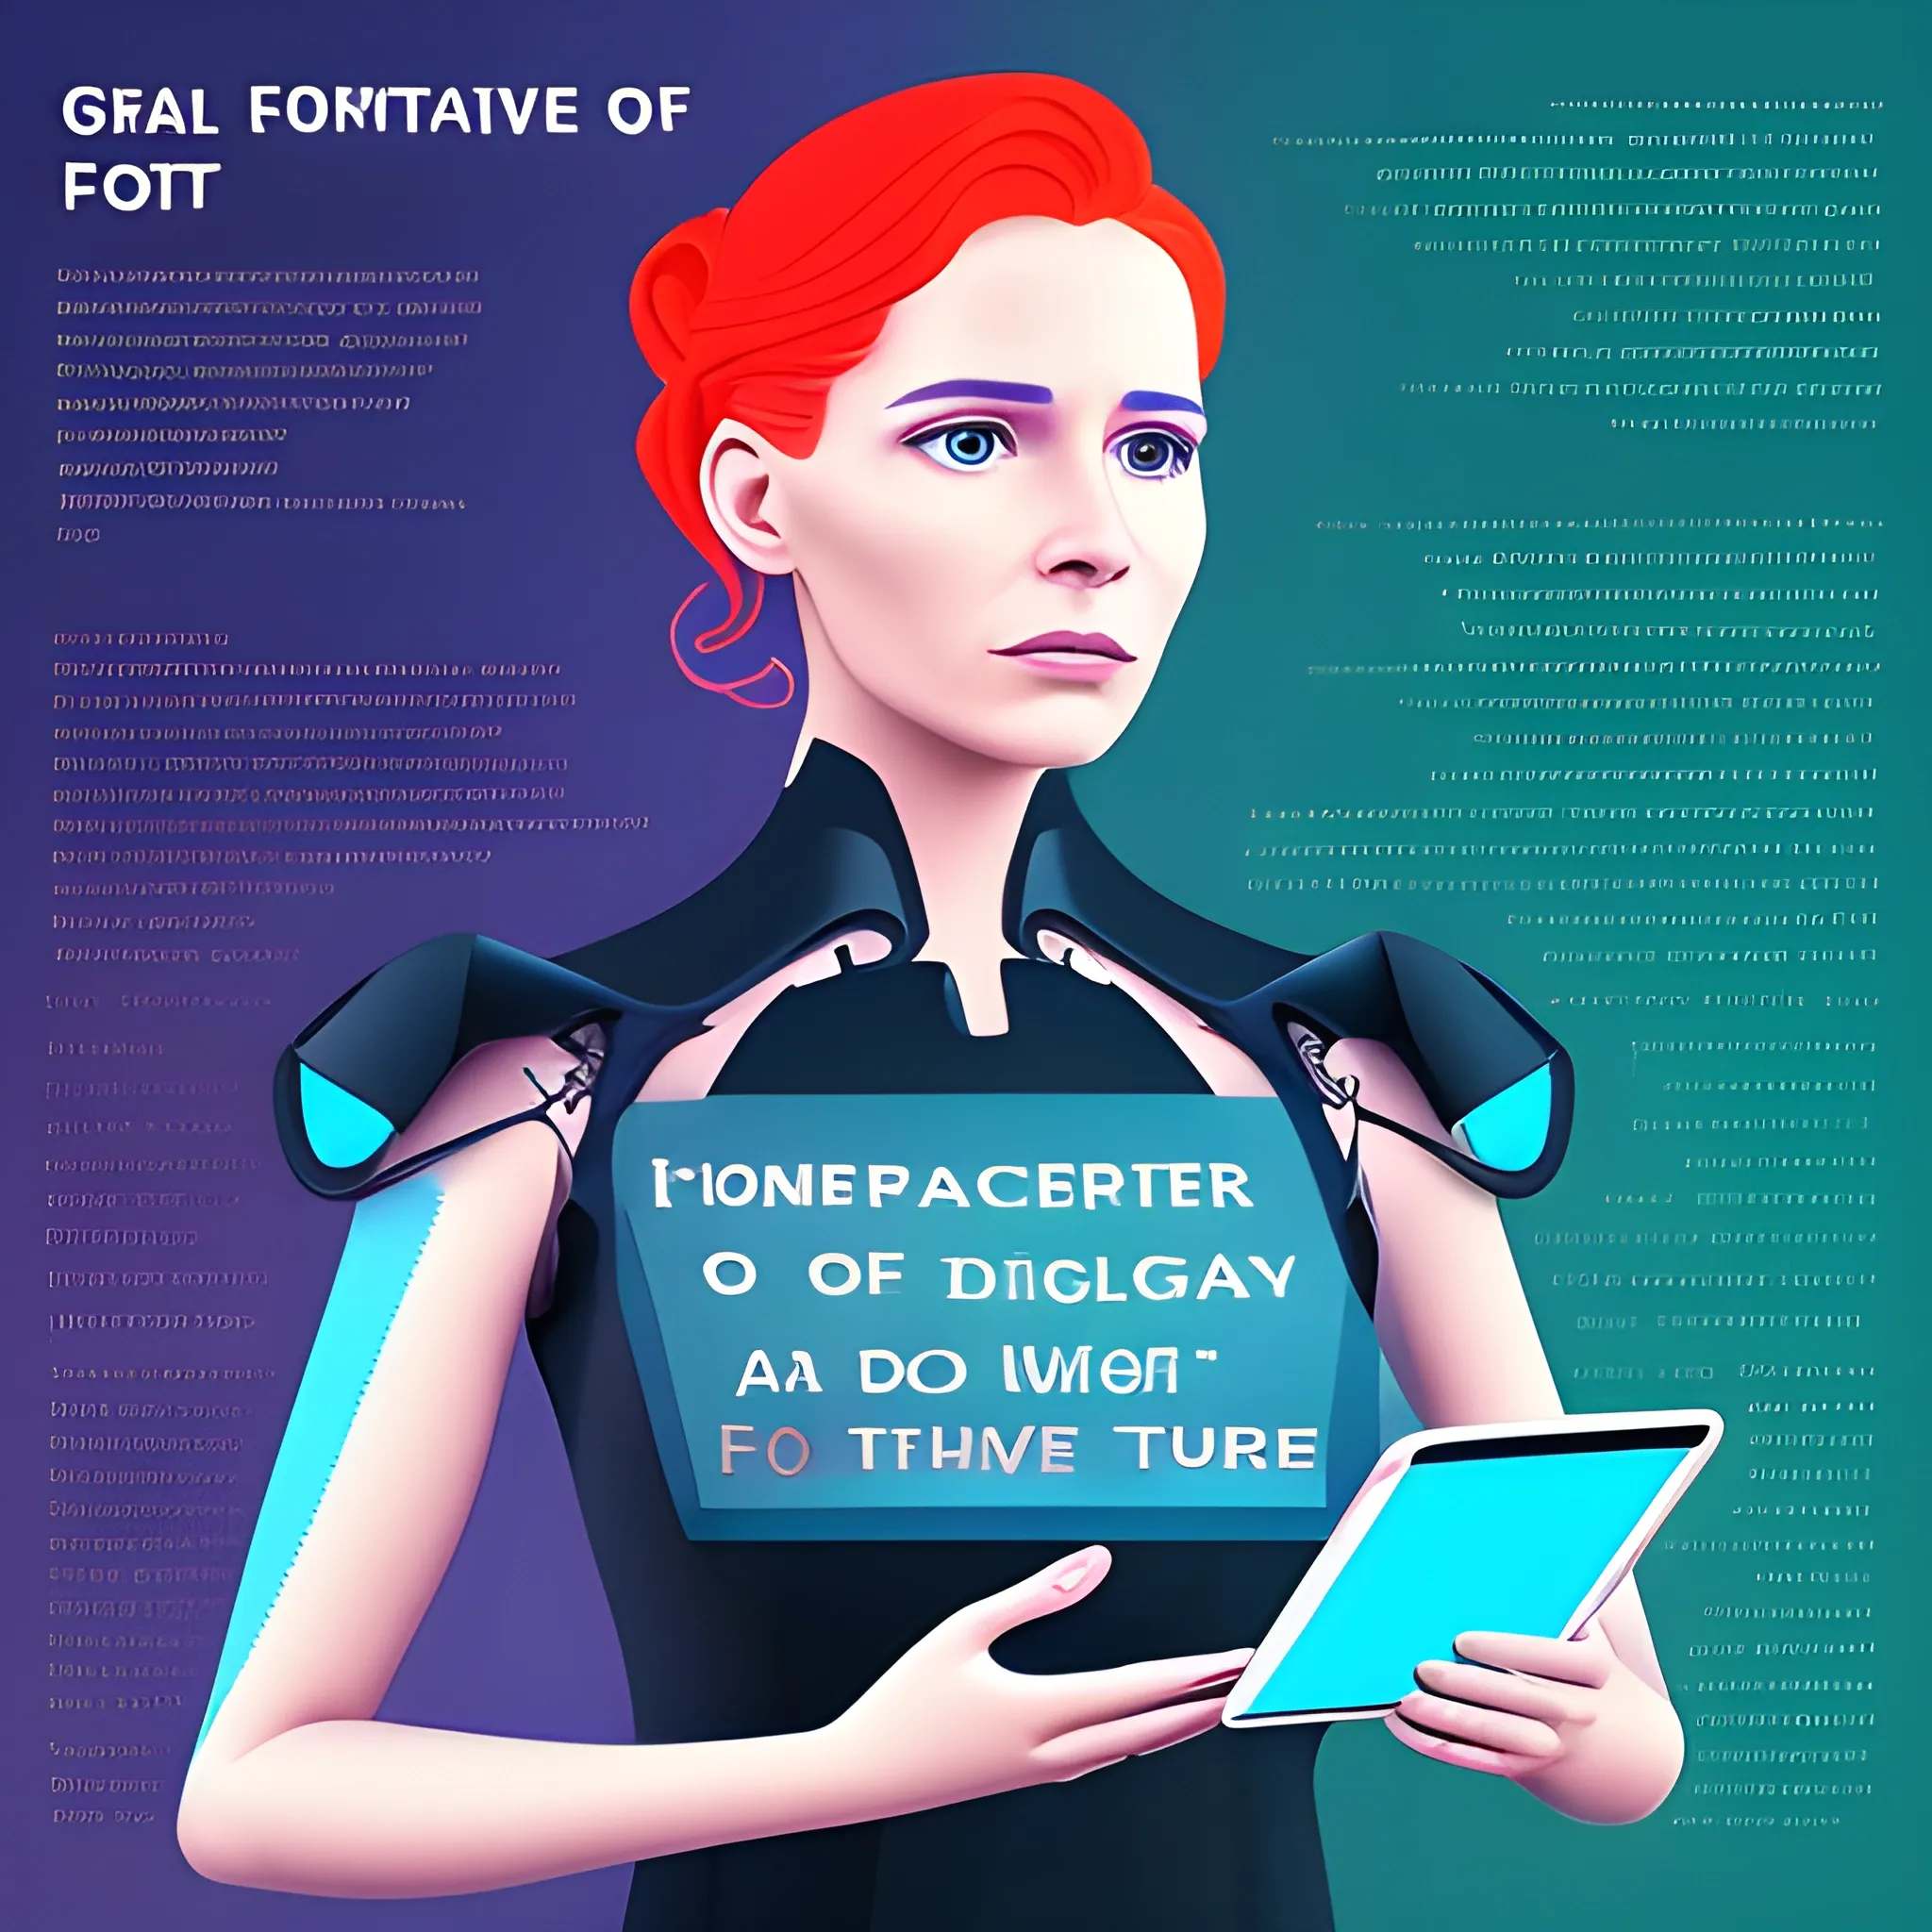 Generate a corporative, EMPATHY, EMOCIONAL, future, colorful, modern image, related to digital products, do not use machines DO NOT USE TEXT , with this concept: “THE WOMAN TEACHER OF the future”, 